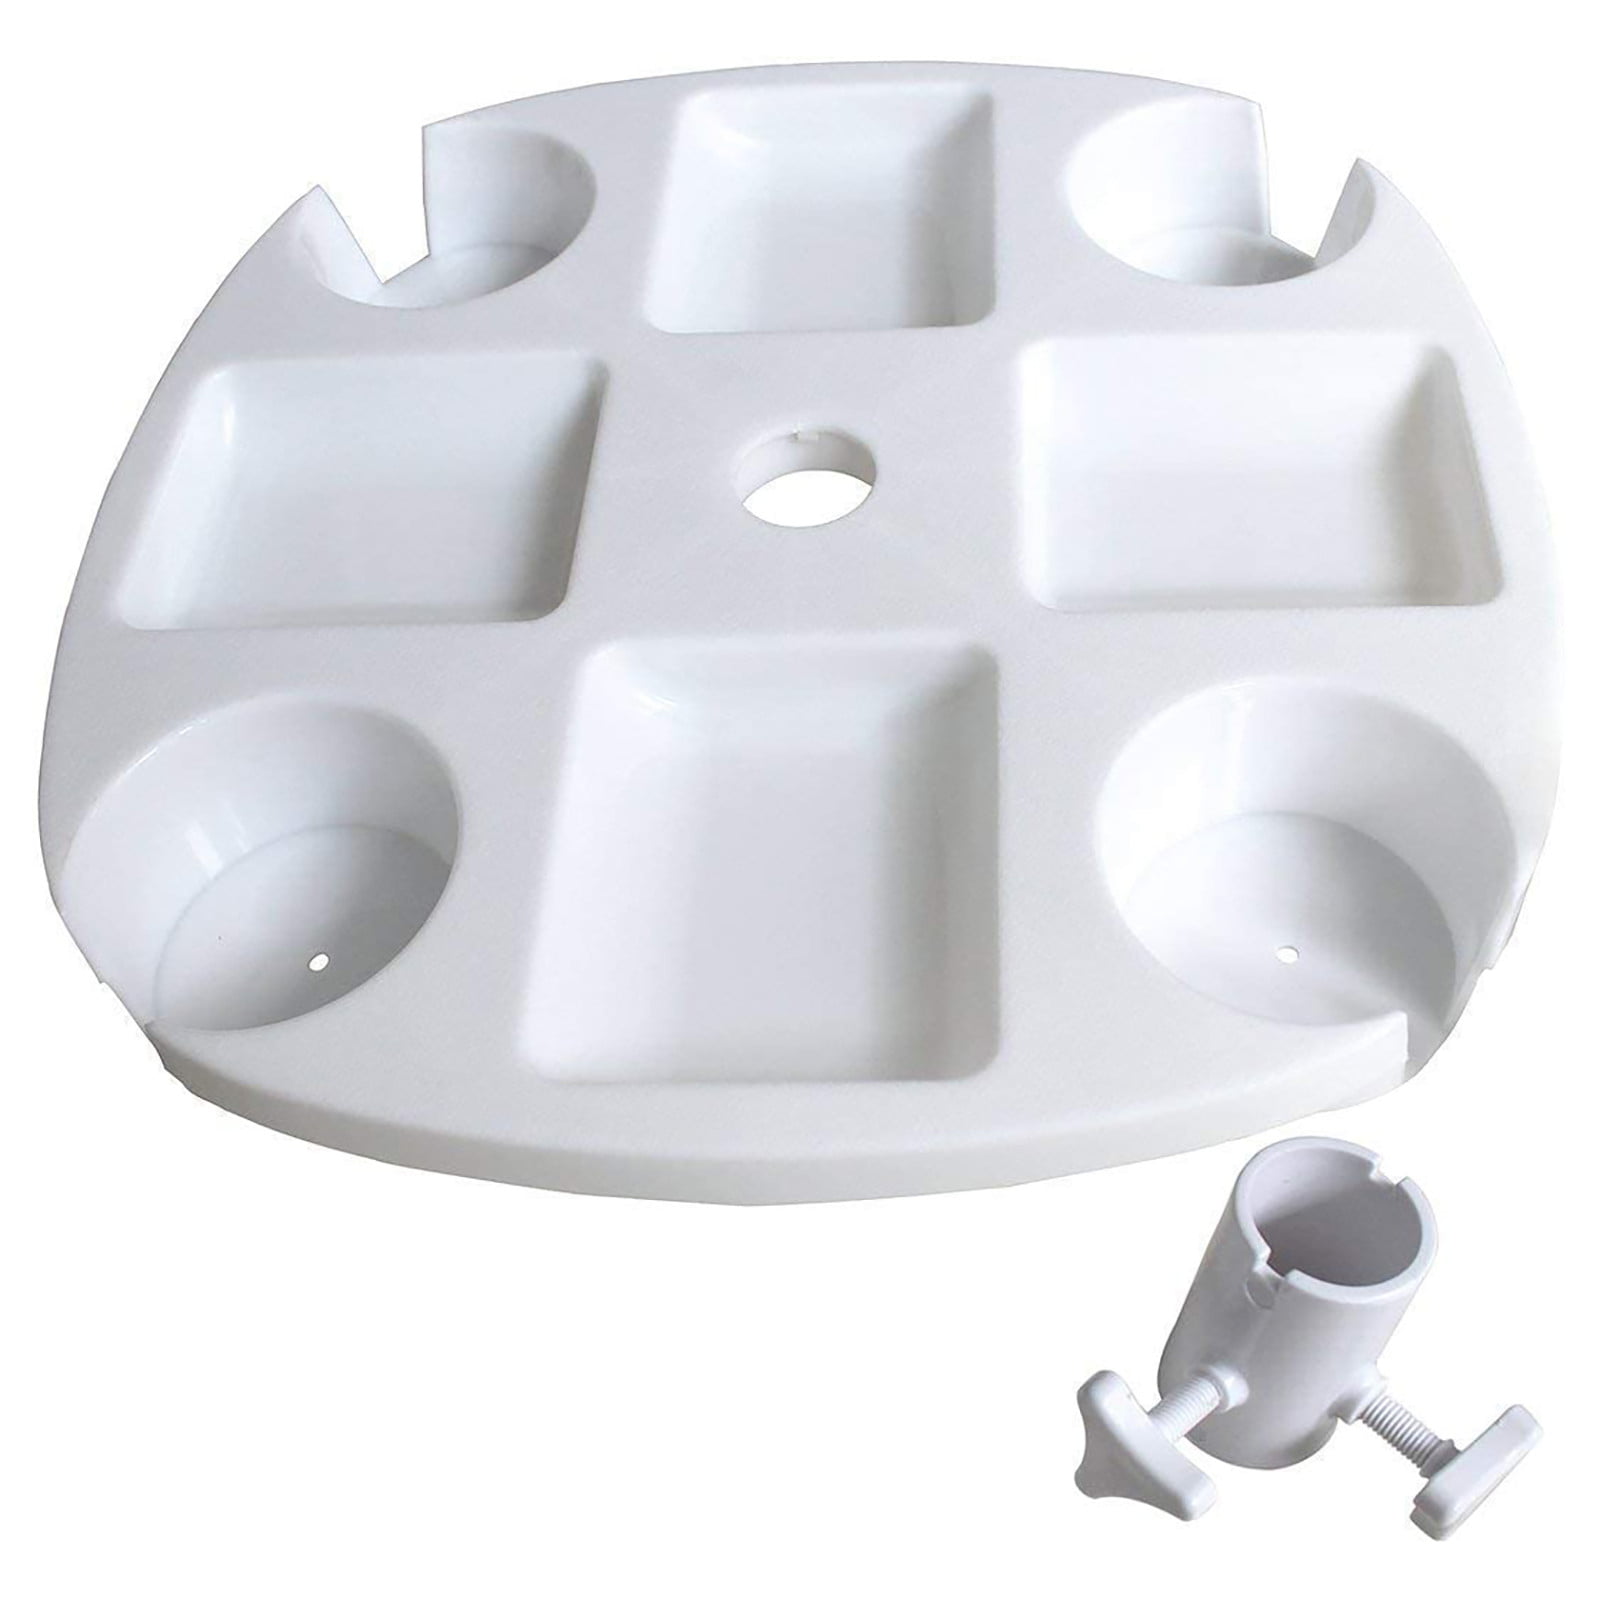 Swimming Pool with Cup Holde，Umbrella Table Tray for Pool Patio scwopeuer Beach Umbrella Table Tray for Beach Garden